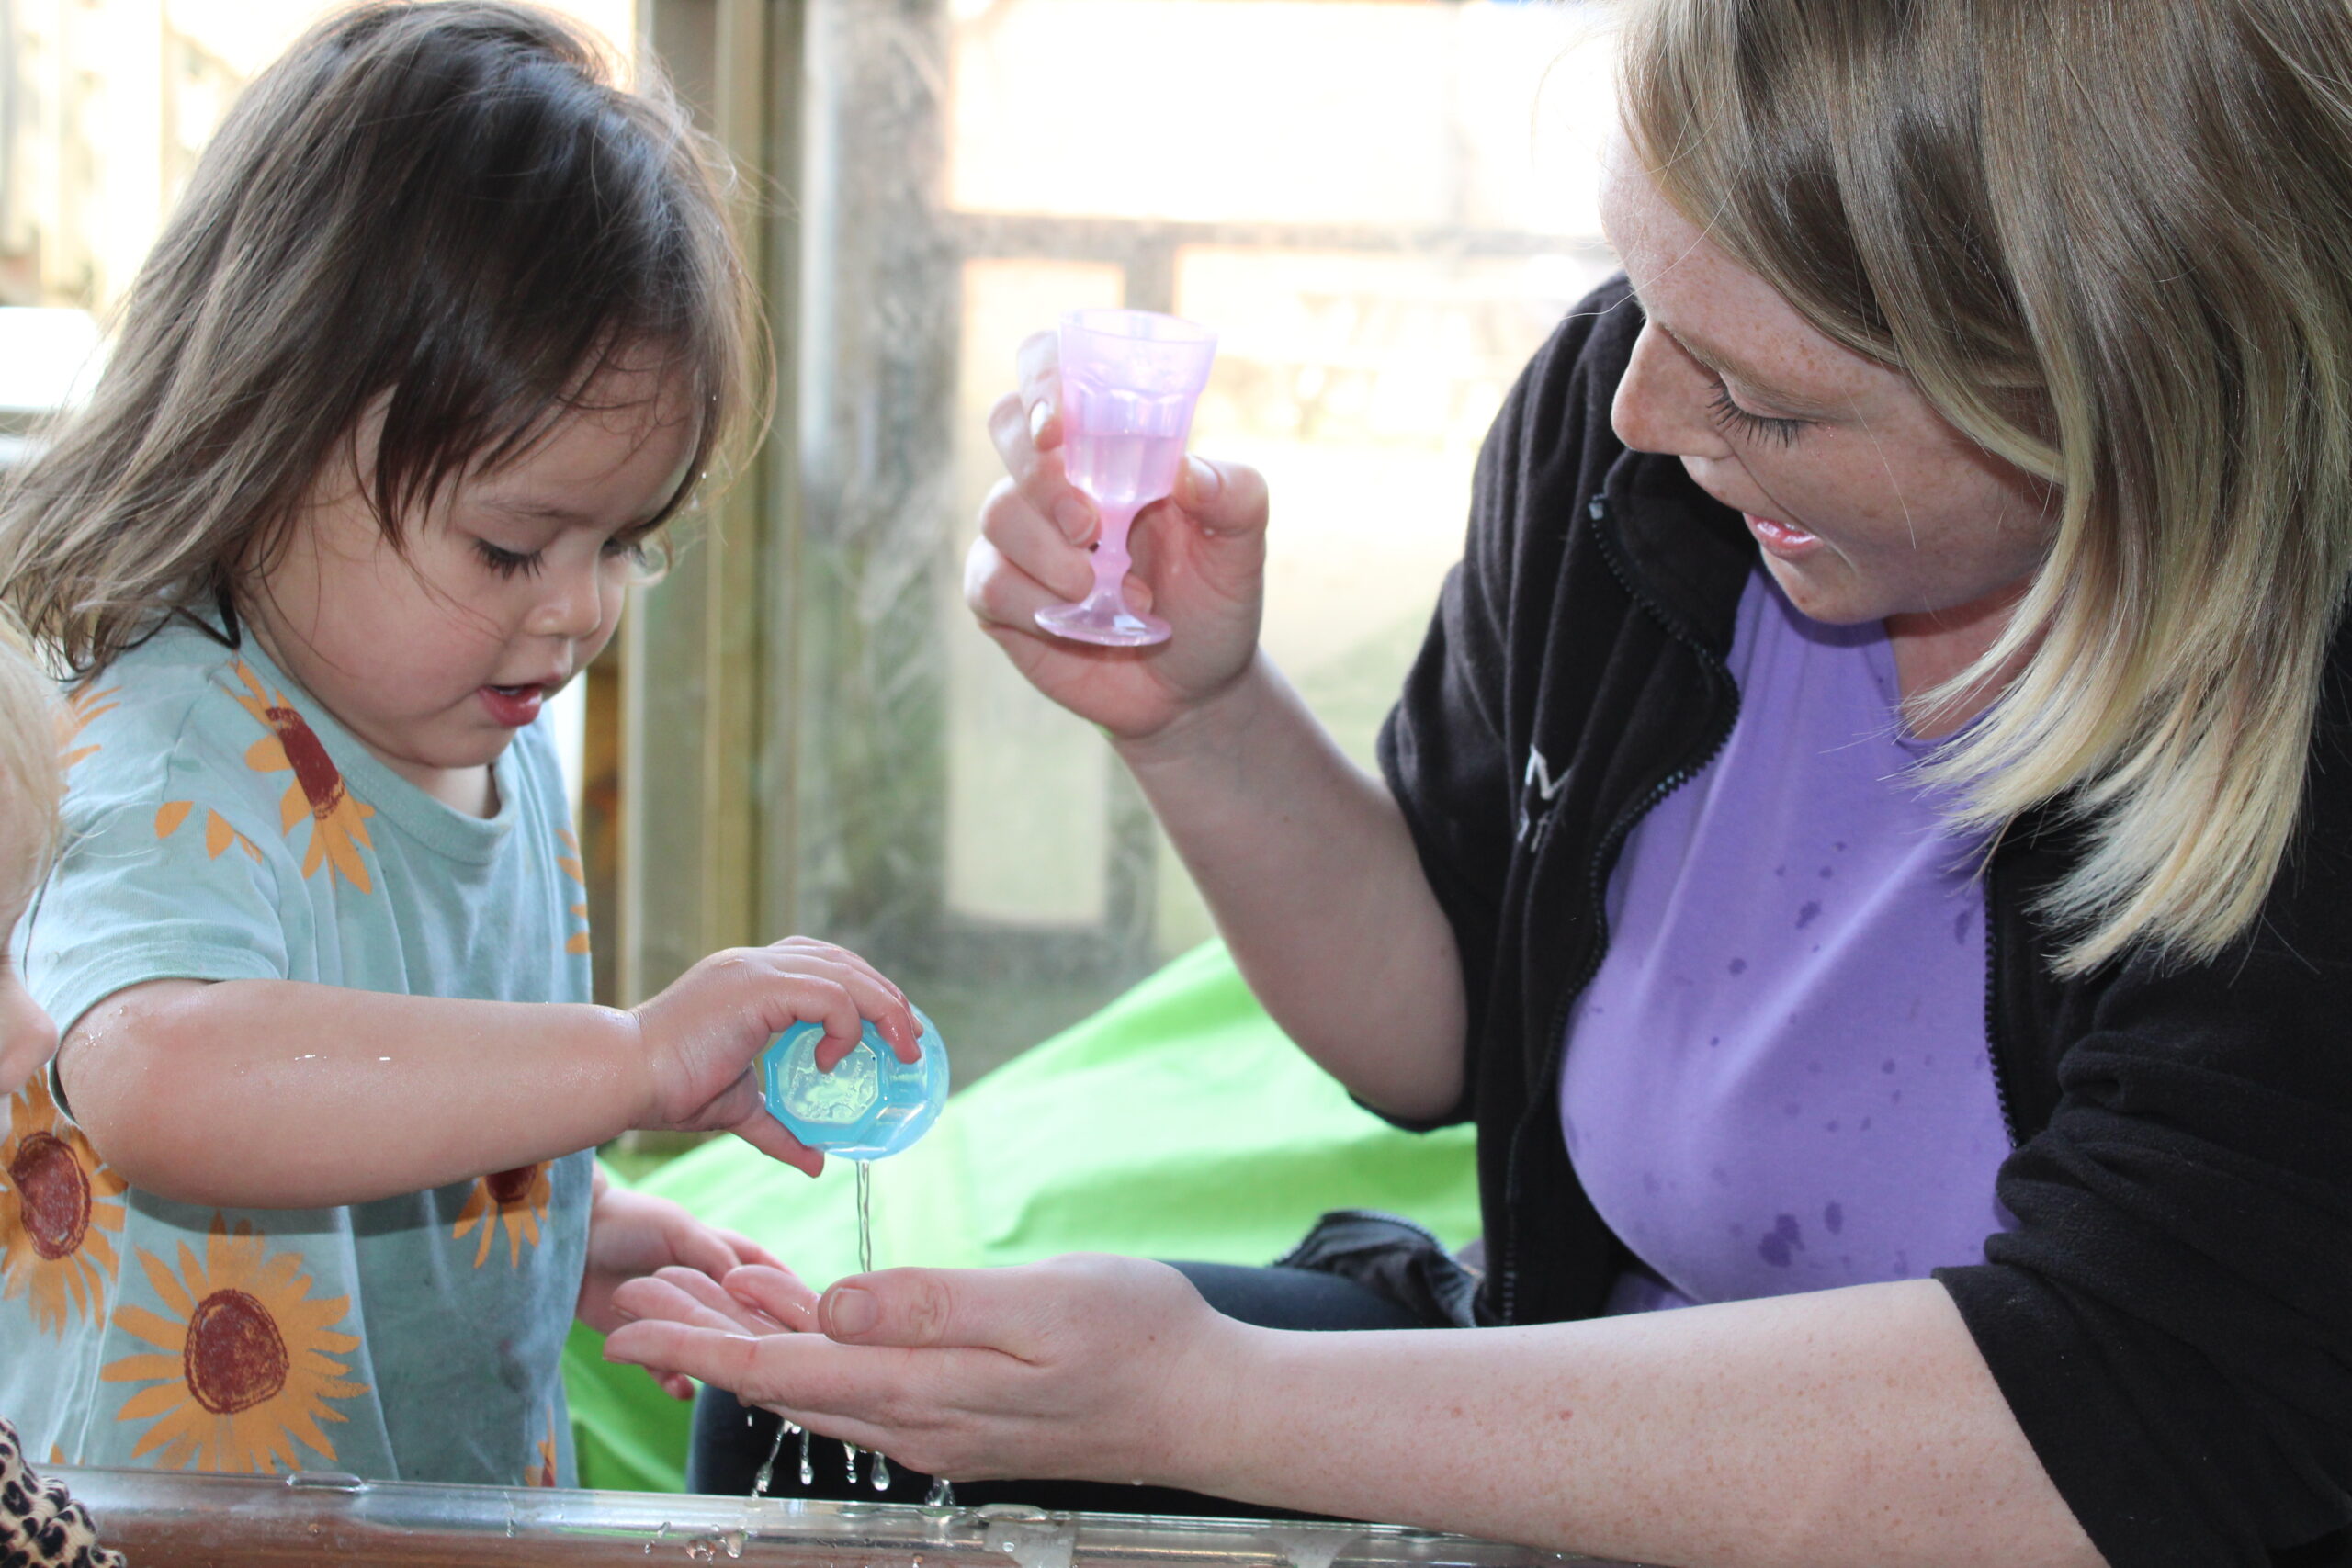 Woolston nursery team member practising pouring with child